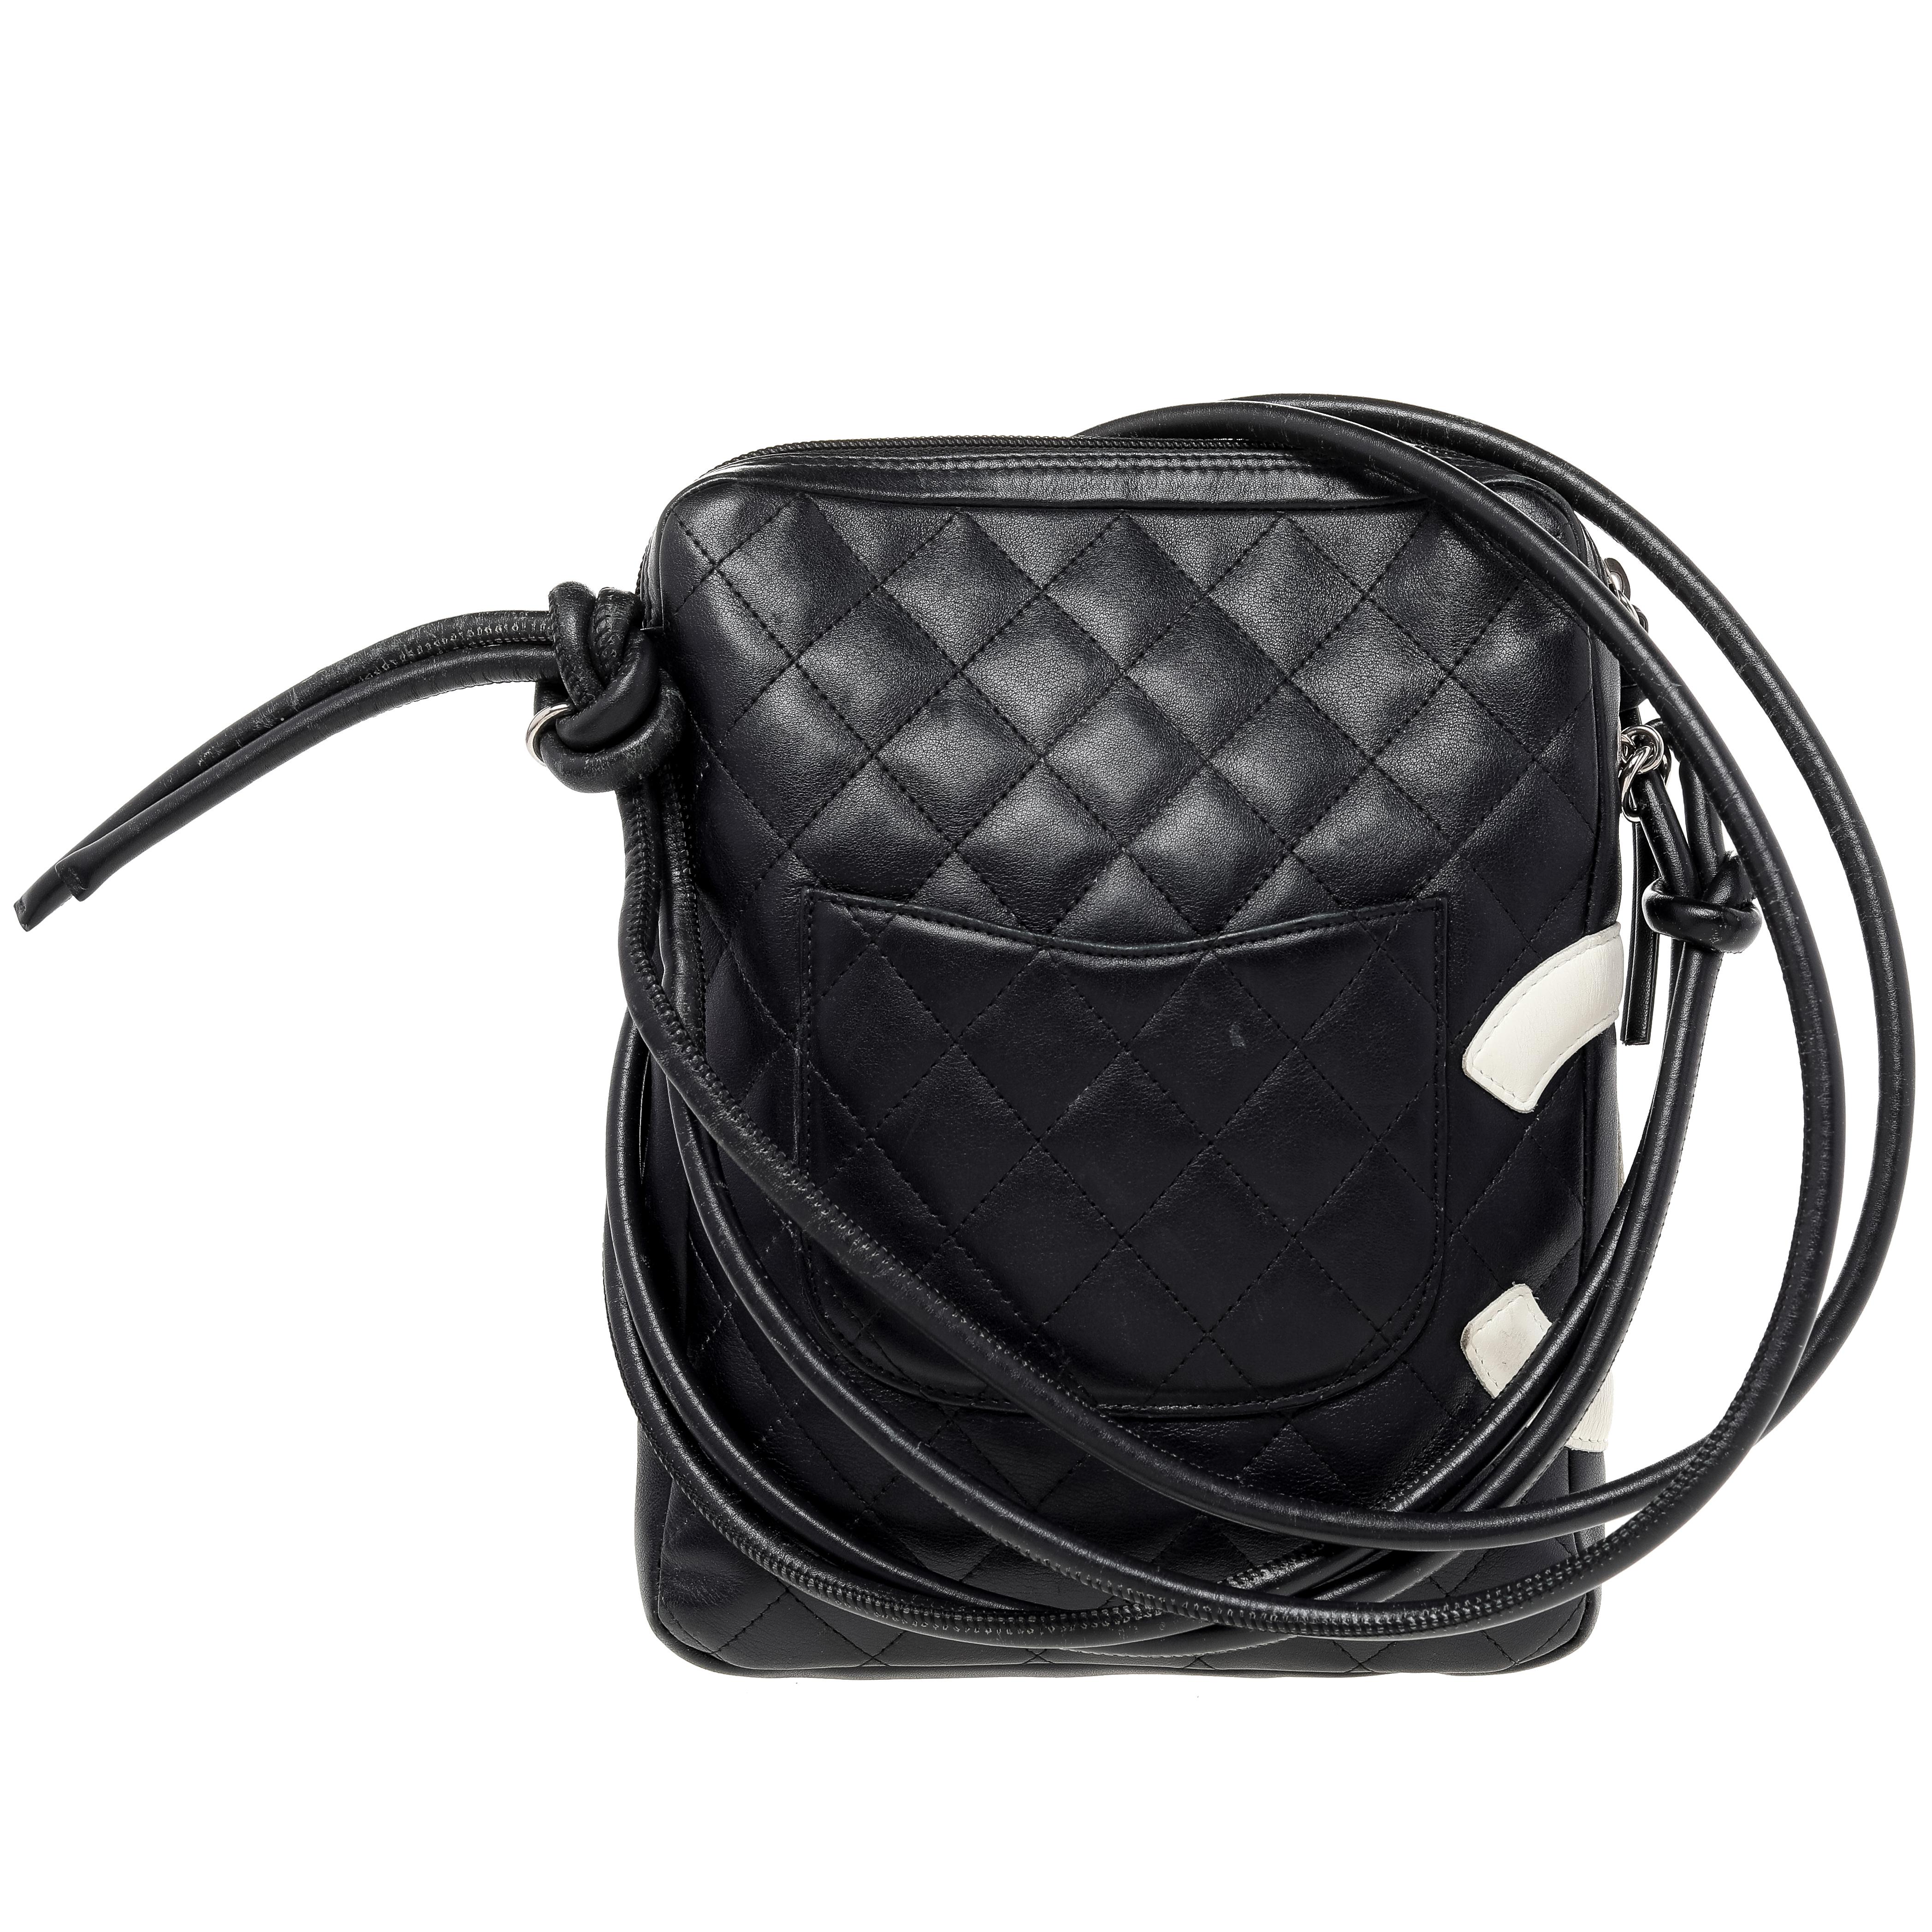 Chanel's Messenger bag has been expertly crafted into a quilted leather body in a square silhouette. It comes detailed with two interlocked 'CC' and is secured with a top zipper closure. This bag comes fitted with a shoulder strap and the lined